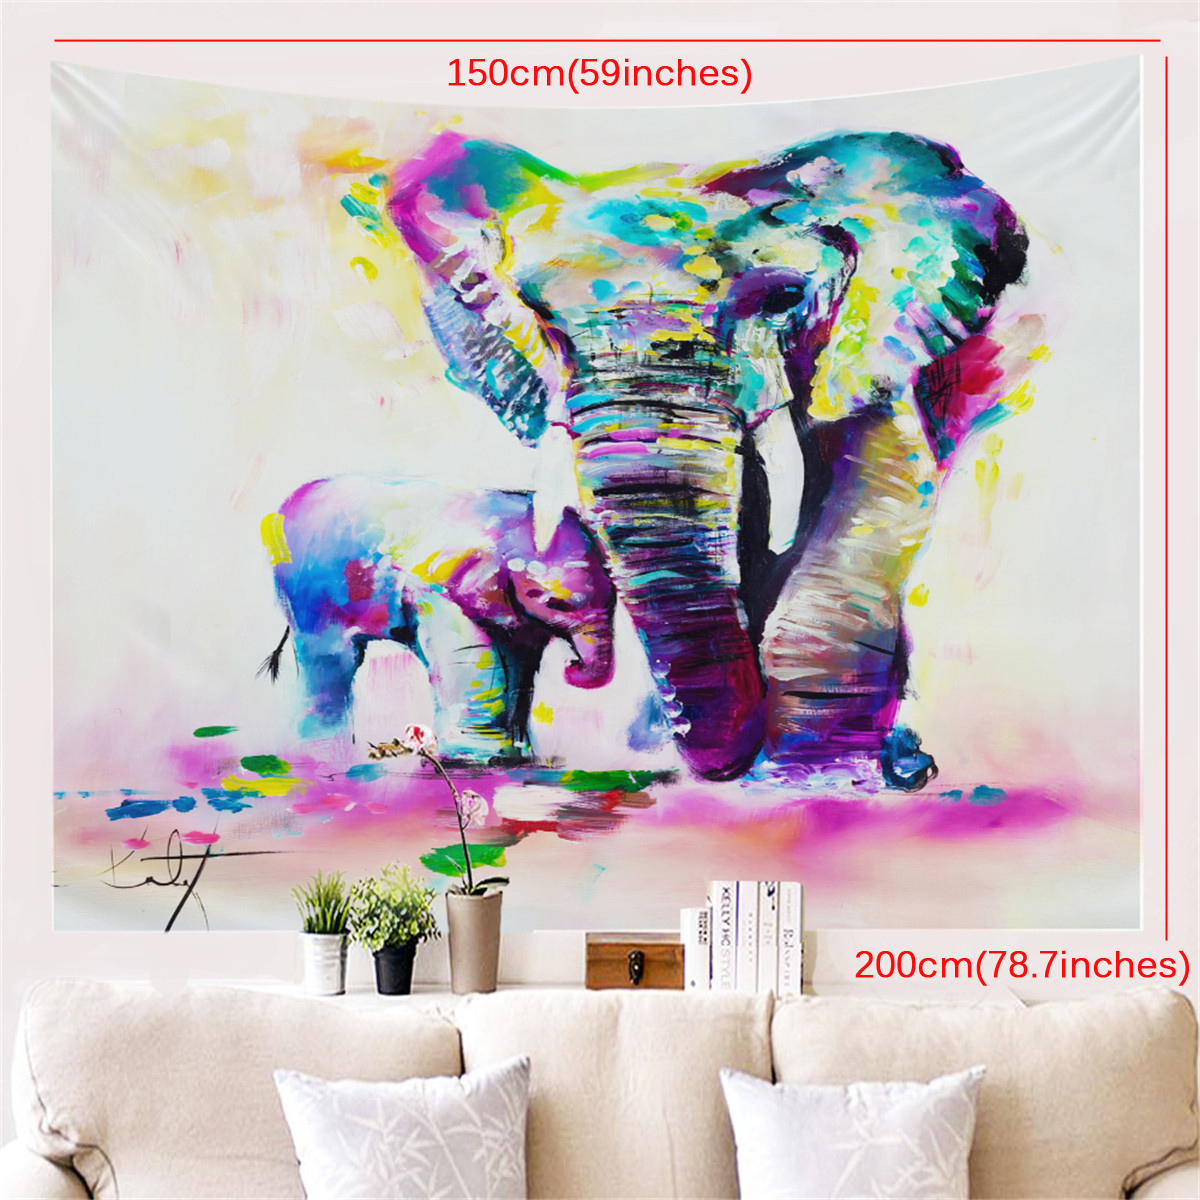 Colorful-Dye-Elephant-Tapestry-Wall-Hanging-Hippie-Tapestry-Colored-Printed-Decorative-Indian-Tapest-1751738-5